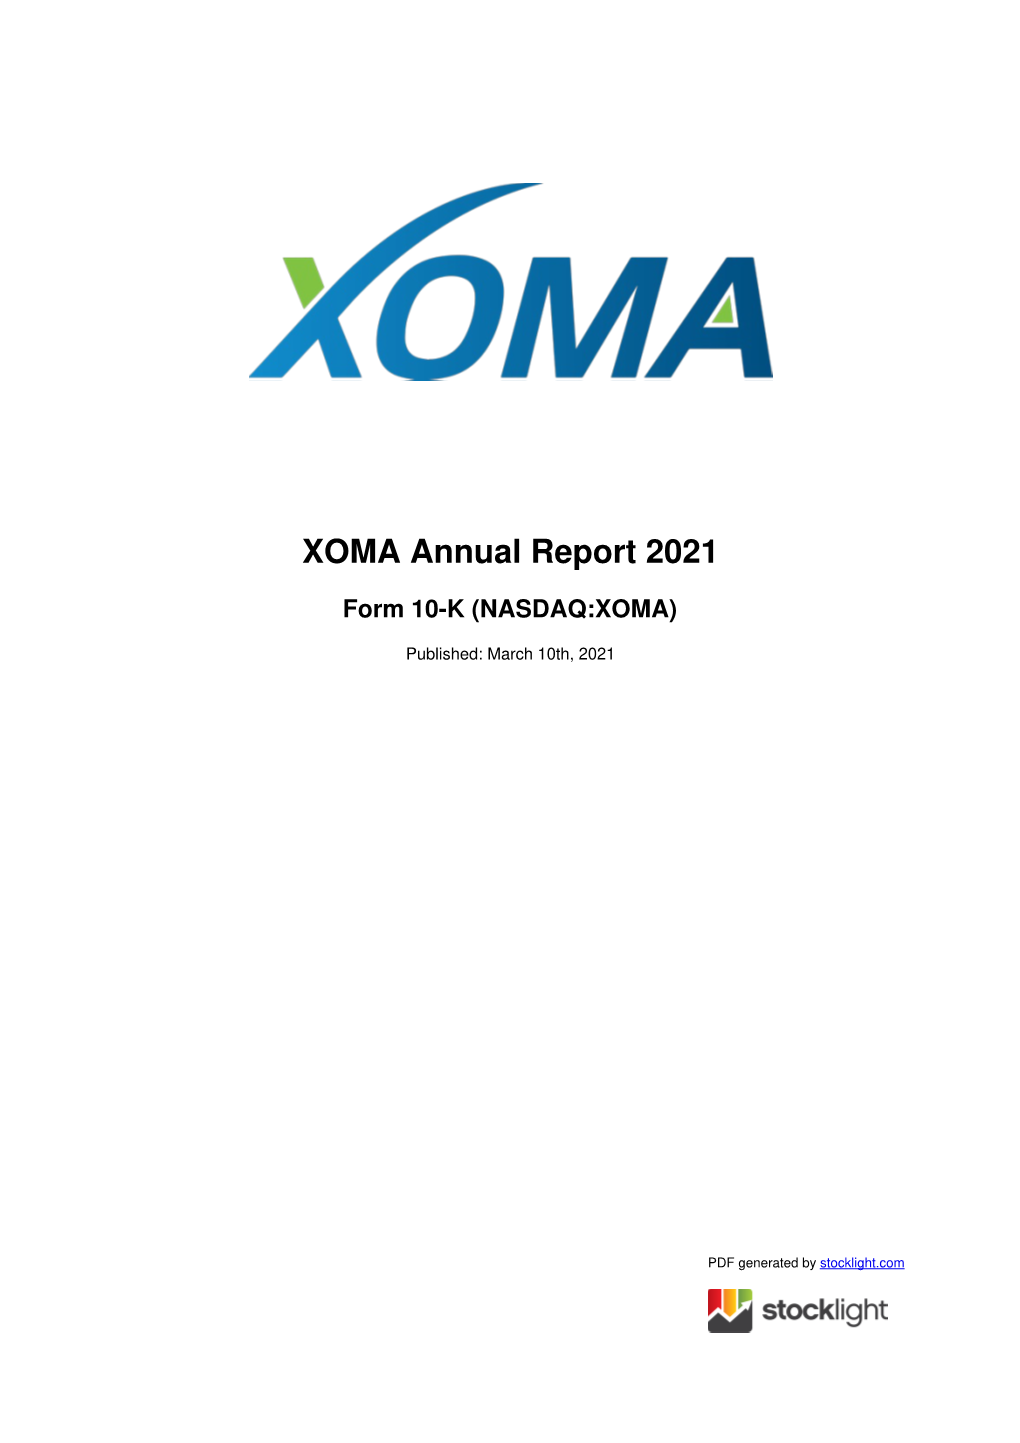 XOMA Annual Report 2021